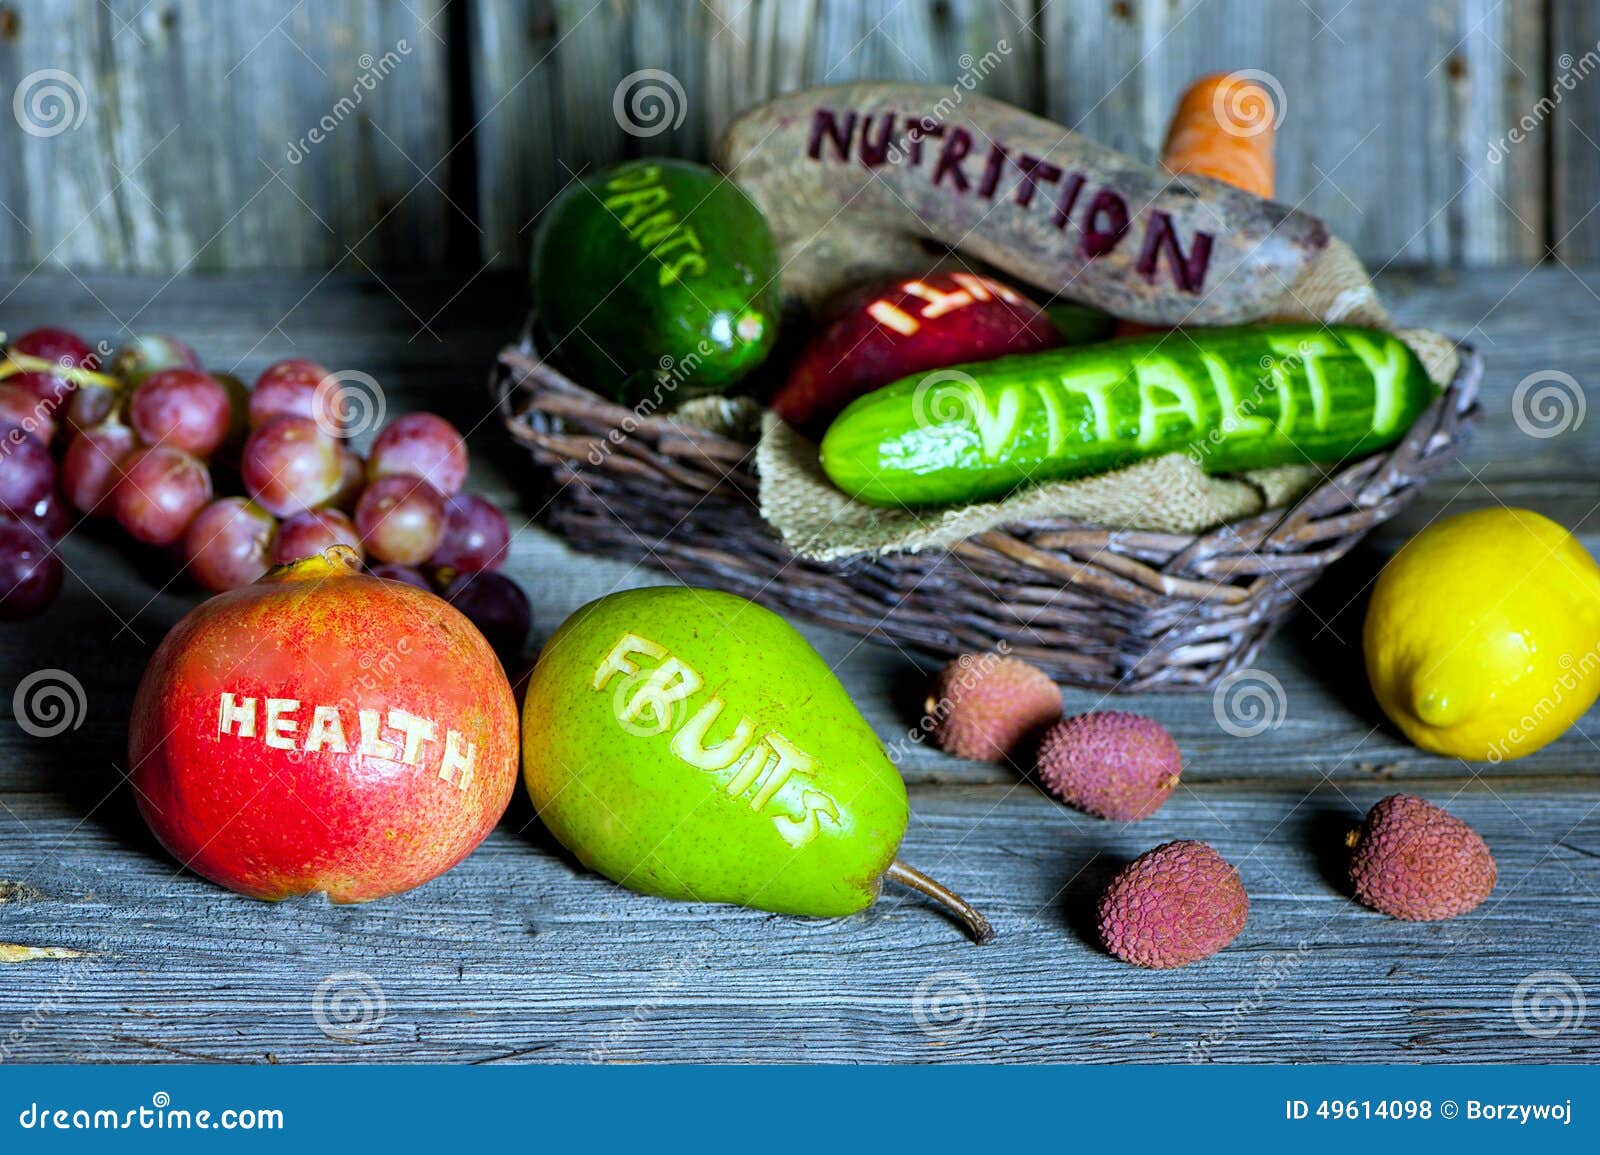 ... fruits and vegetables with cut words - healthy lifestyle concept